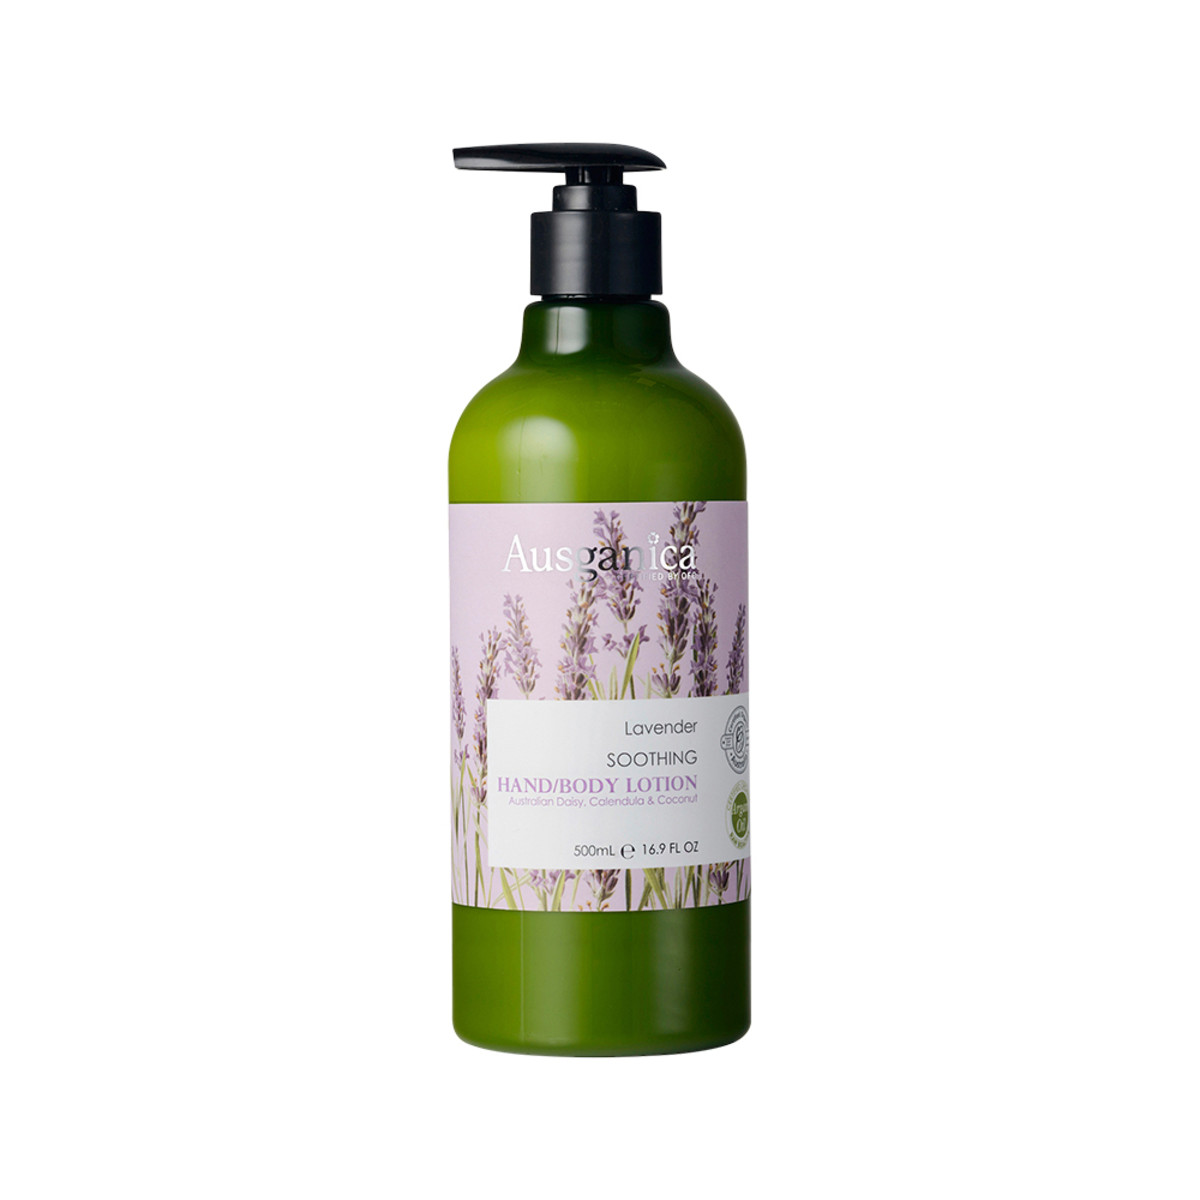 Ausganica Lavender Soothing Hand and Body Lotion